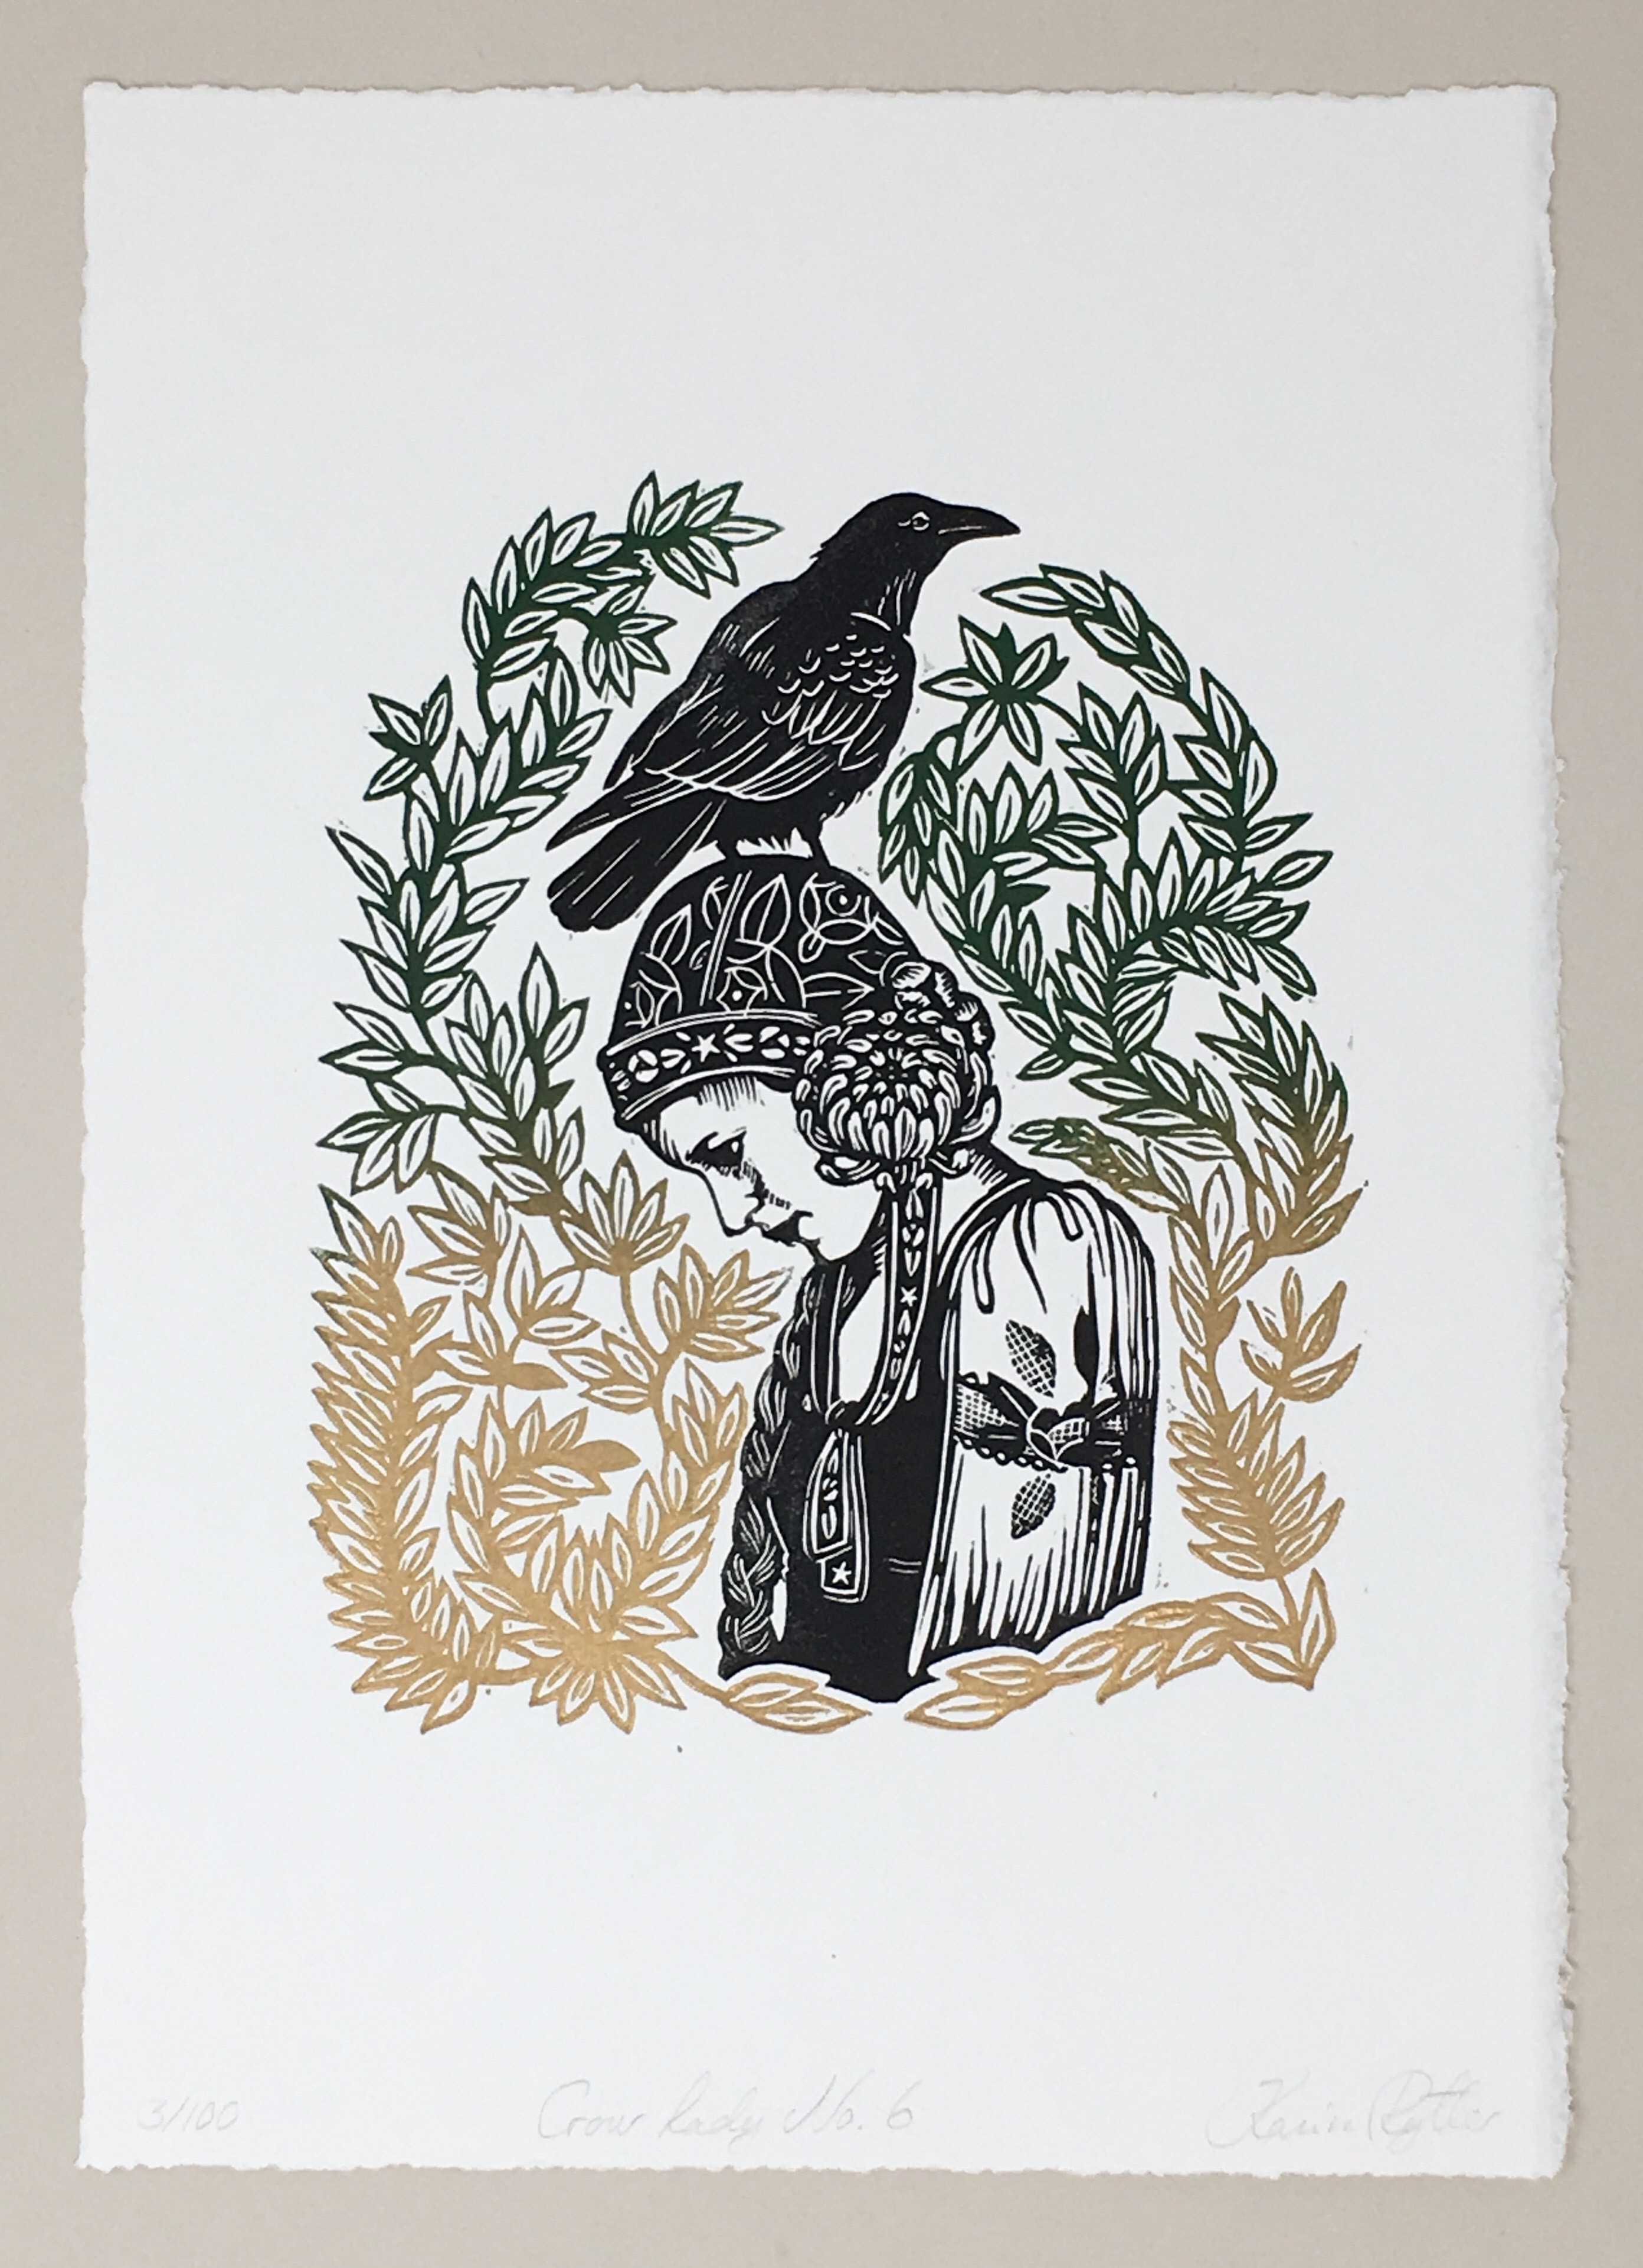 Are you a boy or a girl? - Letterpress printed linocut portrait — Crowing  Hens Bindery